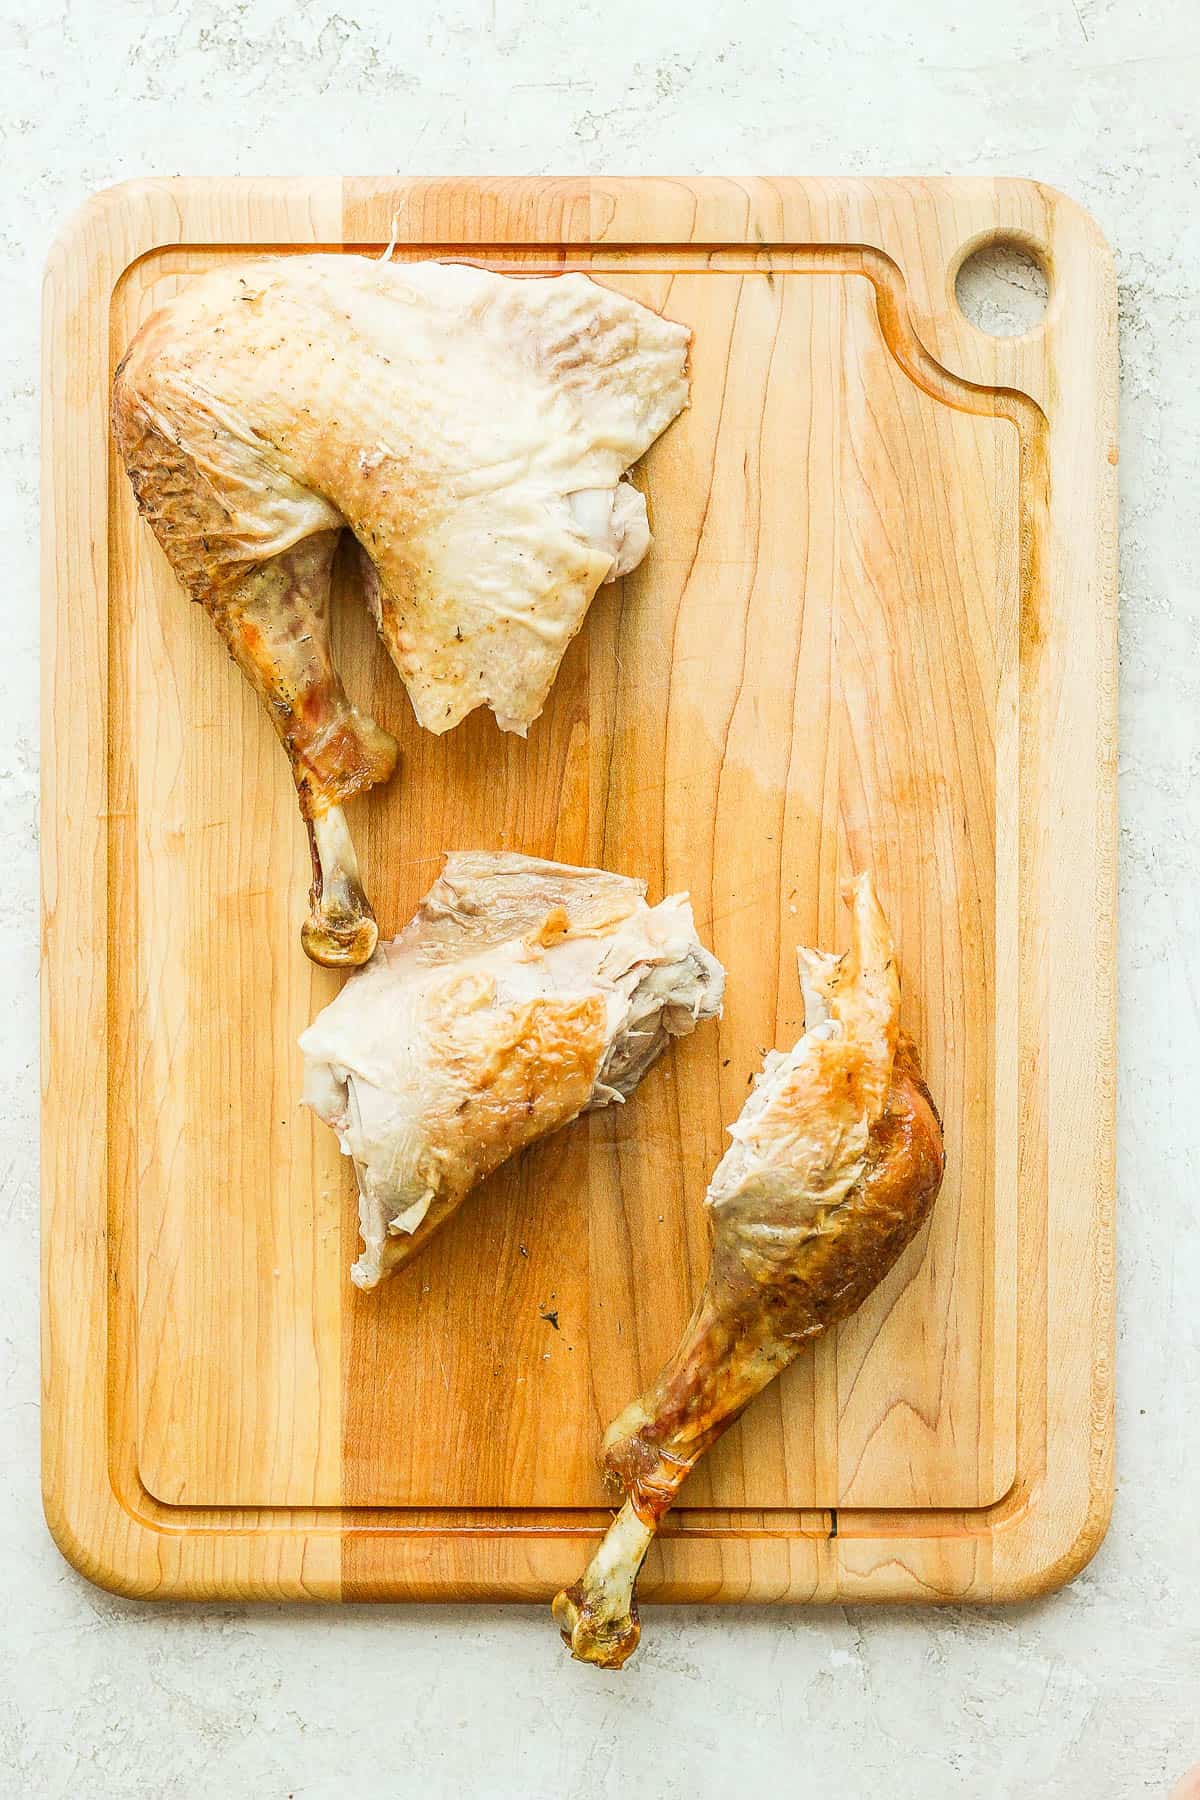 One full turkey leg on the cutting board and one leg that has been separated into a thigh and drumstick.